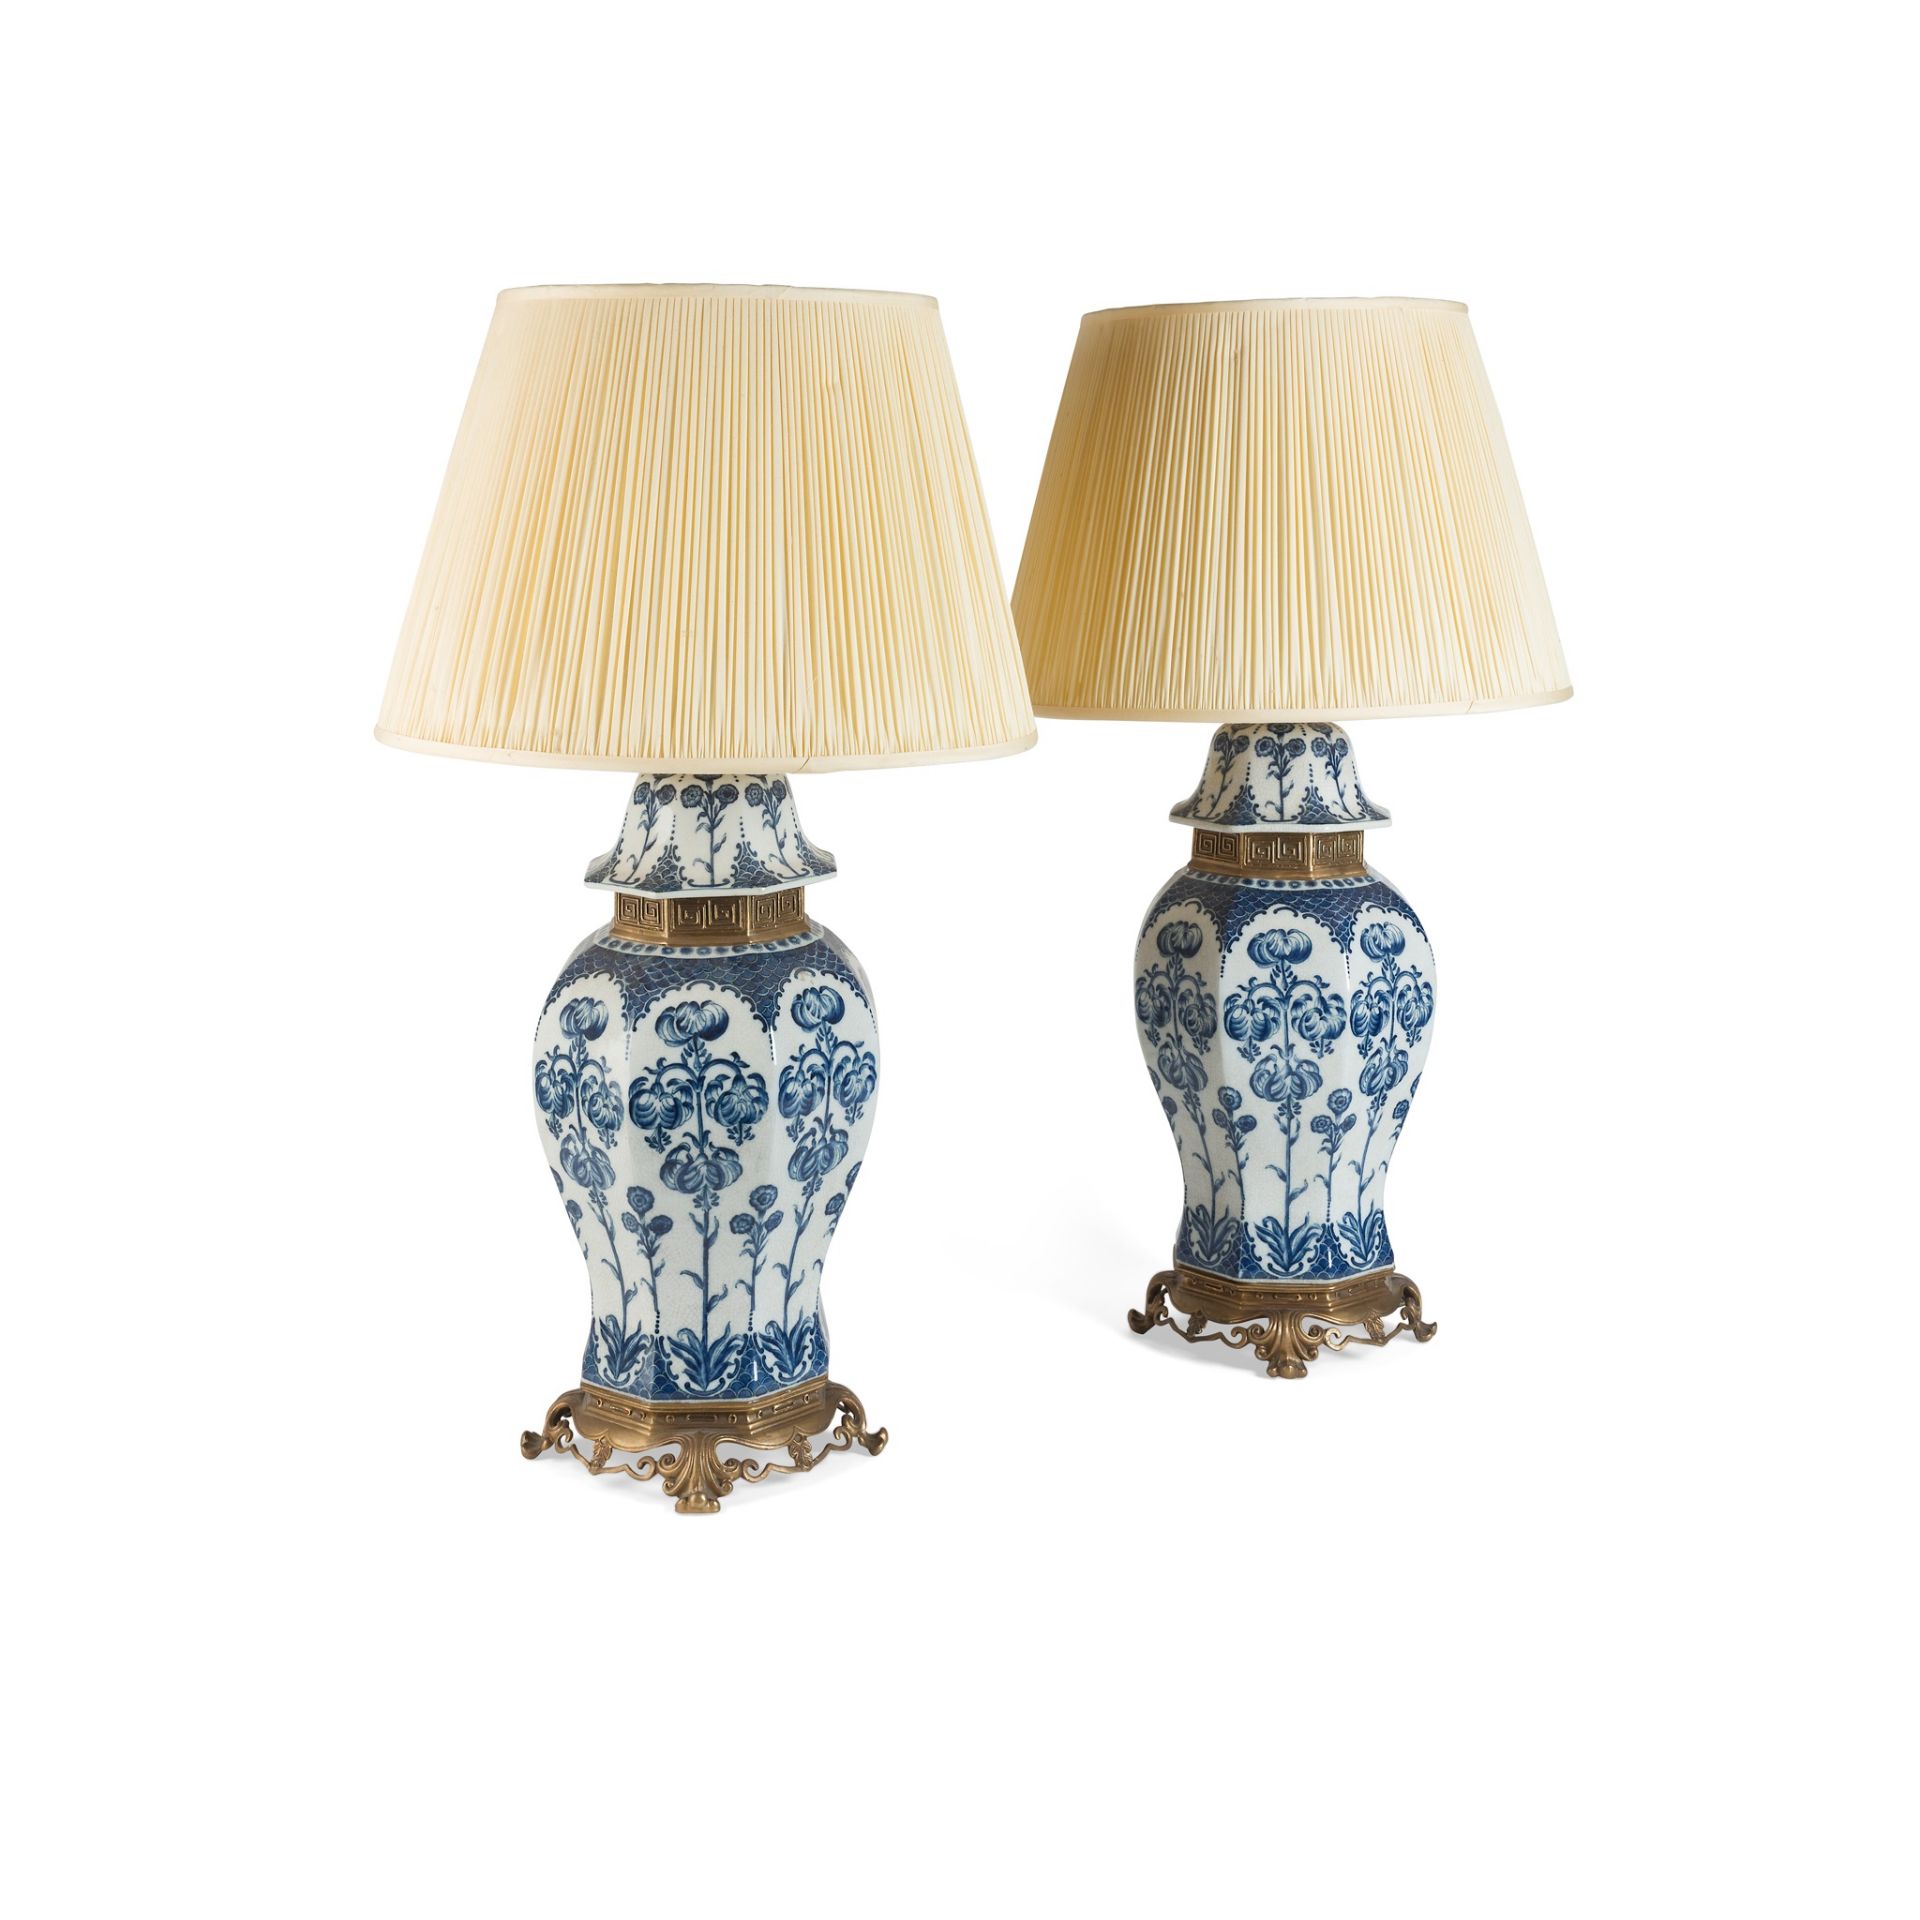 PAIR OF BLUE AND WHITE POTTERY AND GILT METAL MOUNTED BALUSTER LAMPS LATE 19TH/EARLY 20TH CENTURY